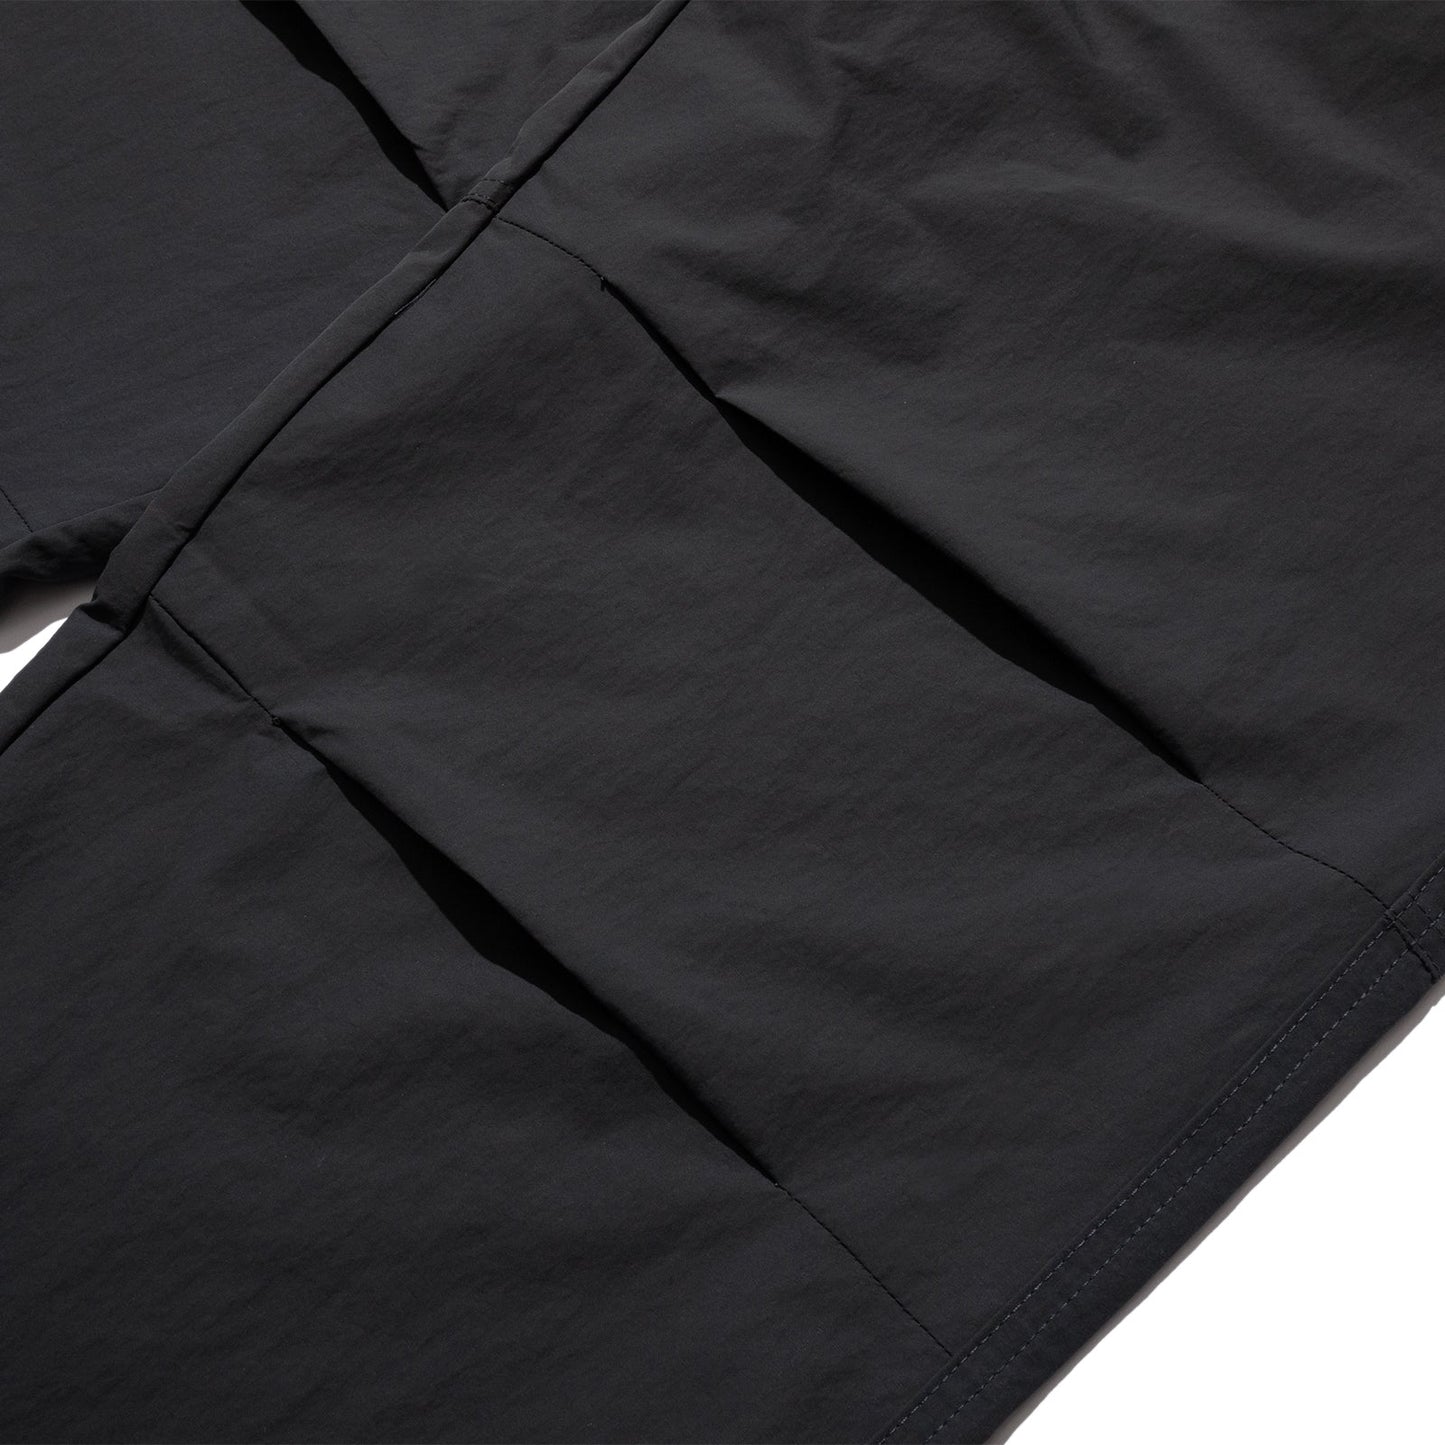 DeMarcoLab - Eezee Mil Trouser #2 - Charcoal